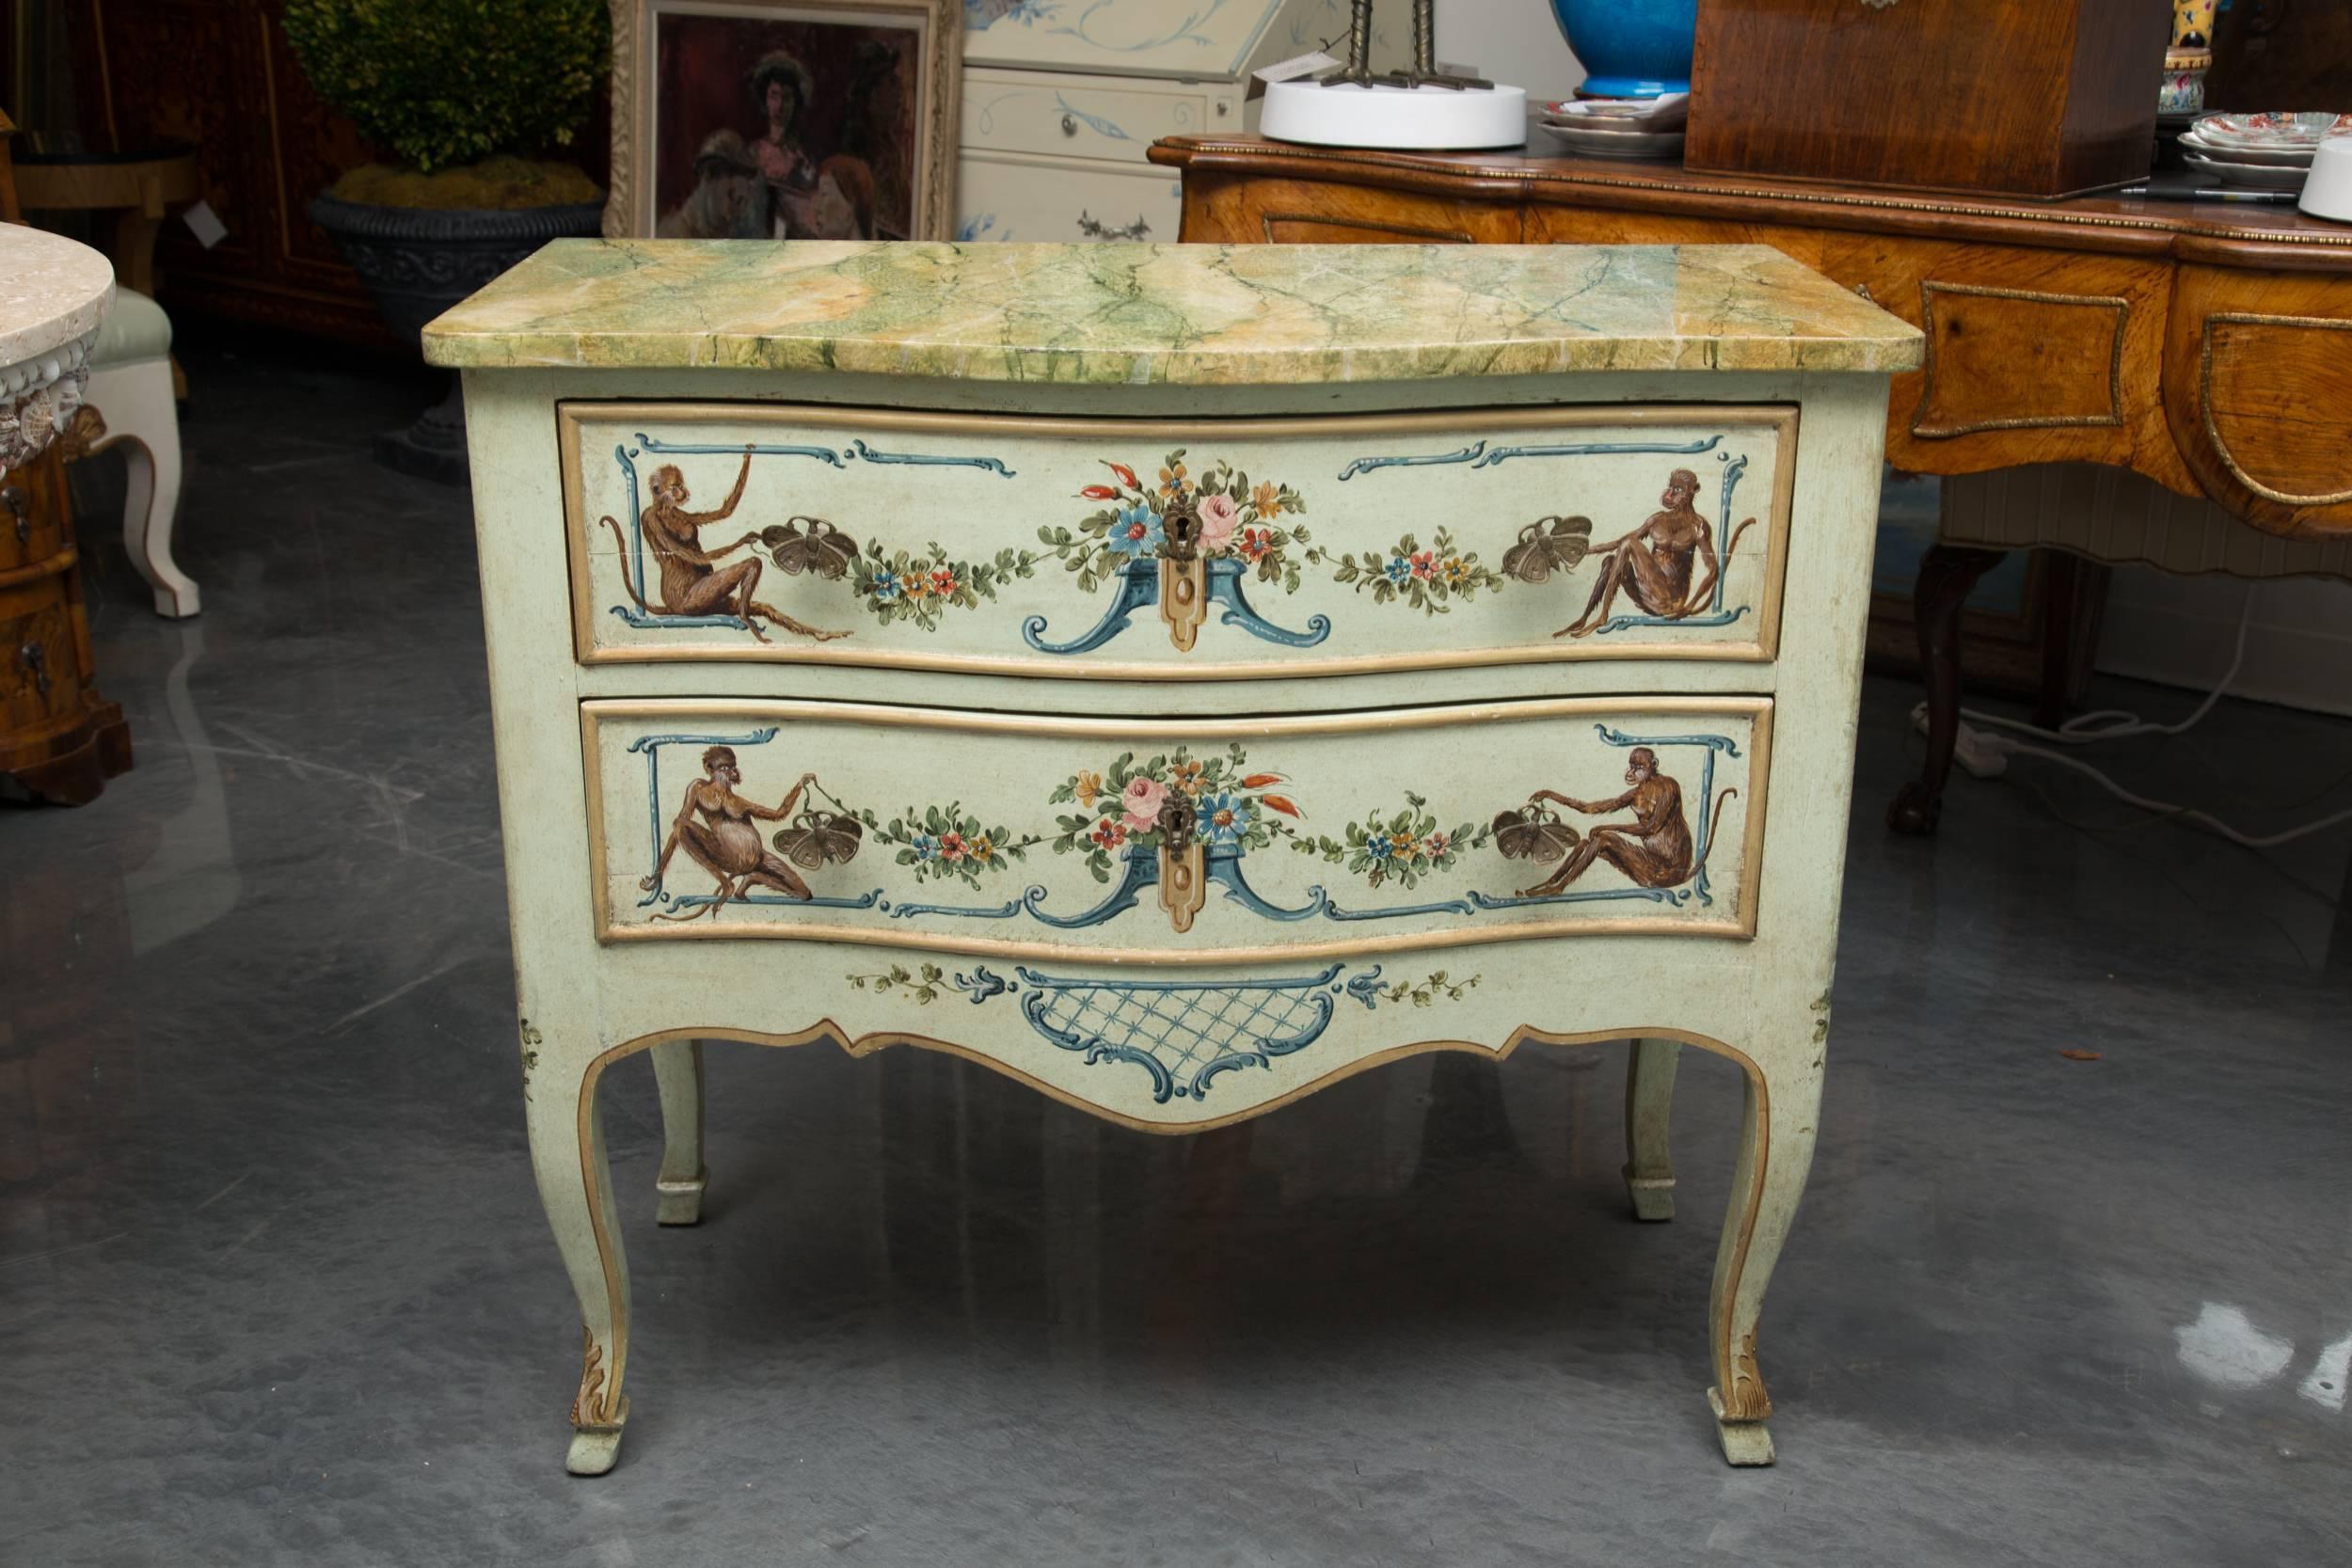 This is a whimsical, yet sophisticated Venetian commode artfully  painted with monkeys flanking floral bouquets and swags on a soft blue background. A beautiful highly glazed  faux marble top offers a realistic image of polished marble over two long